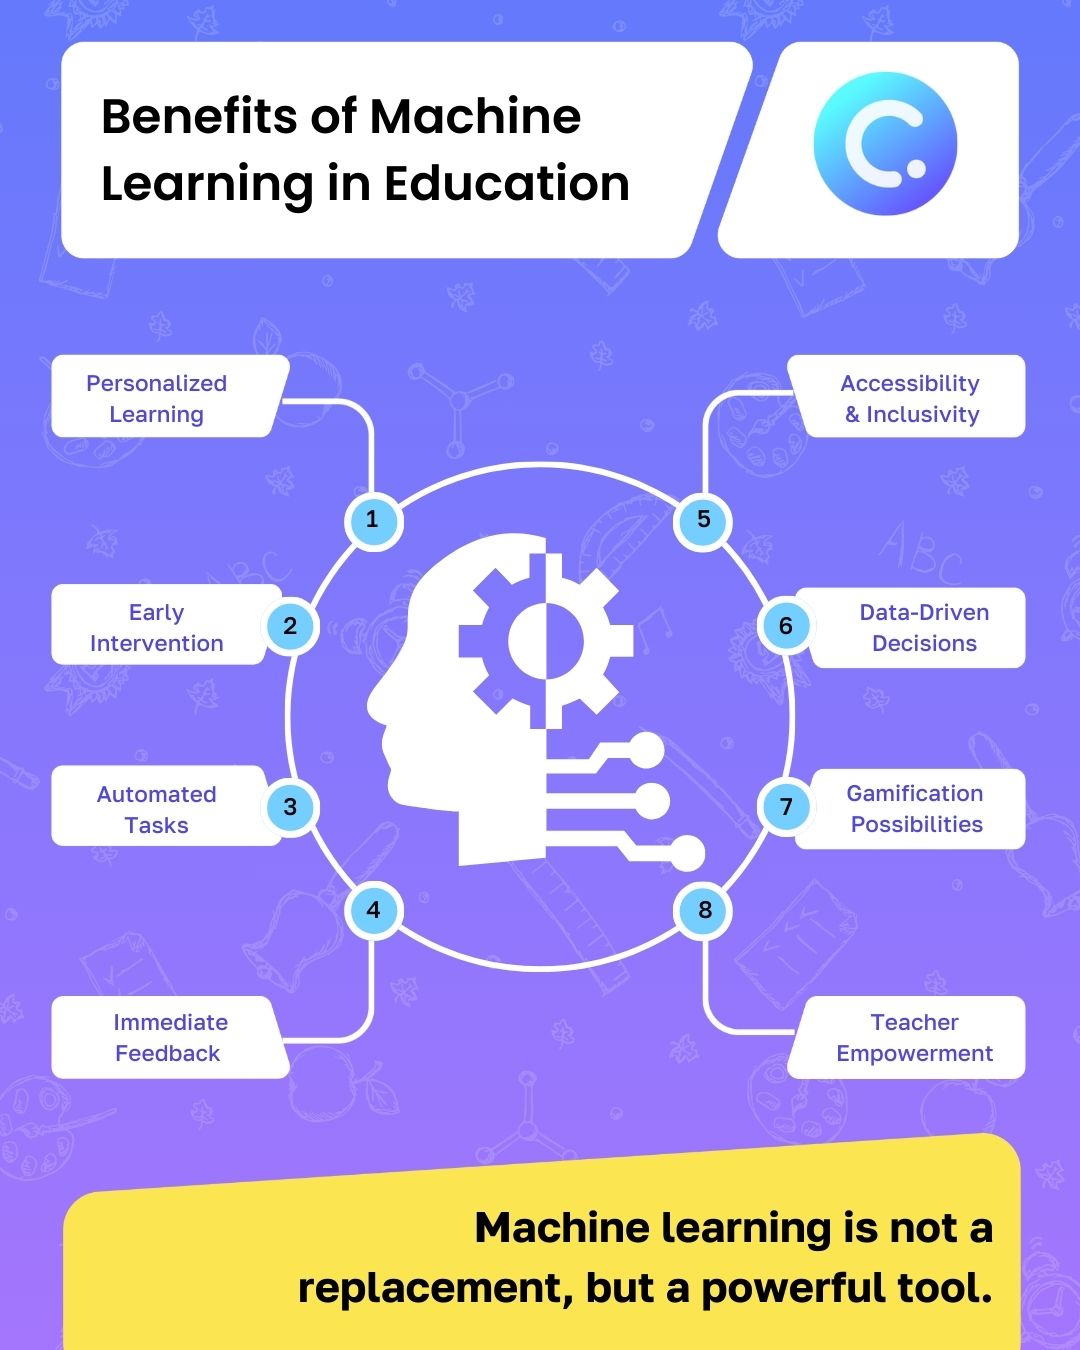 Benefits of machine learning in education